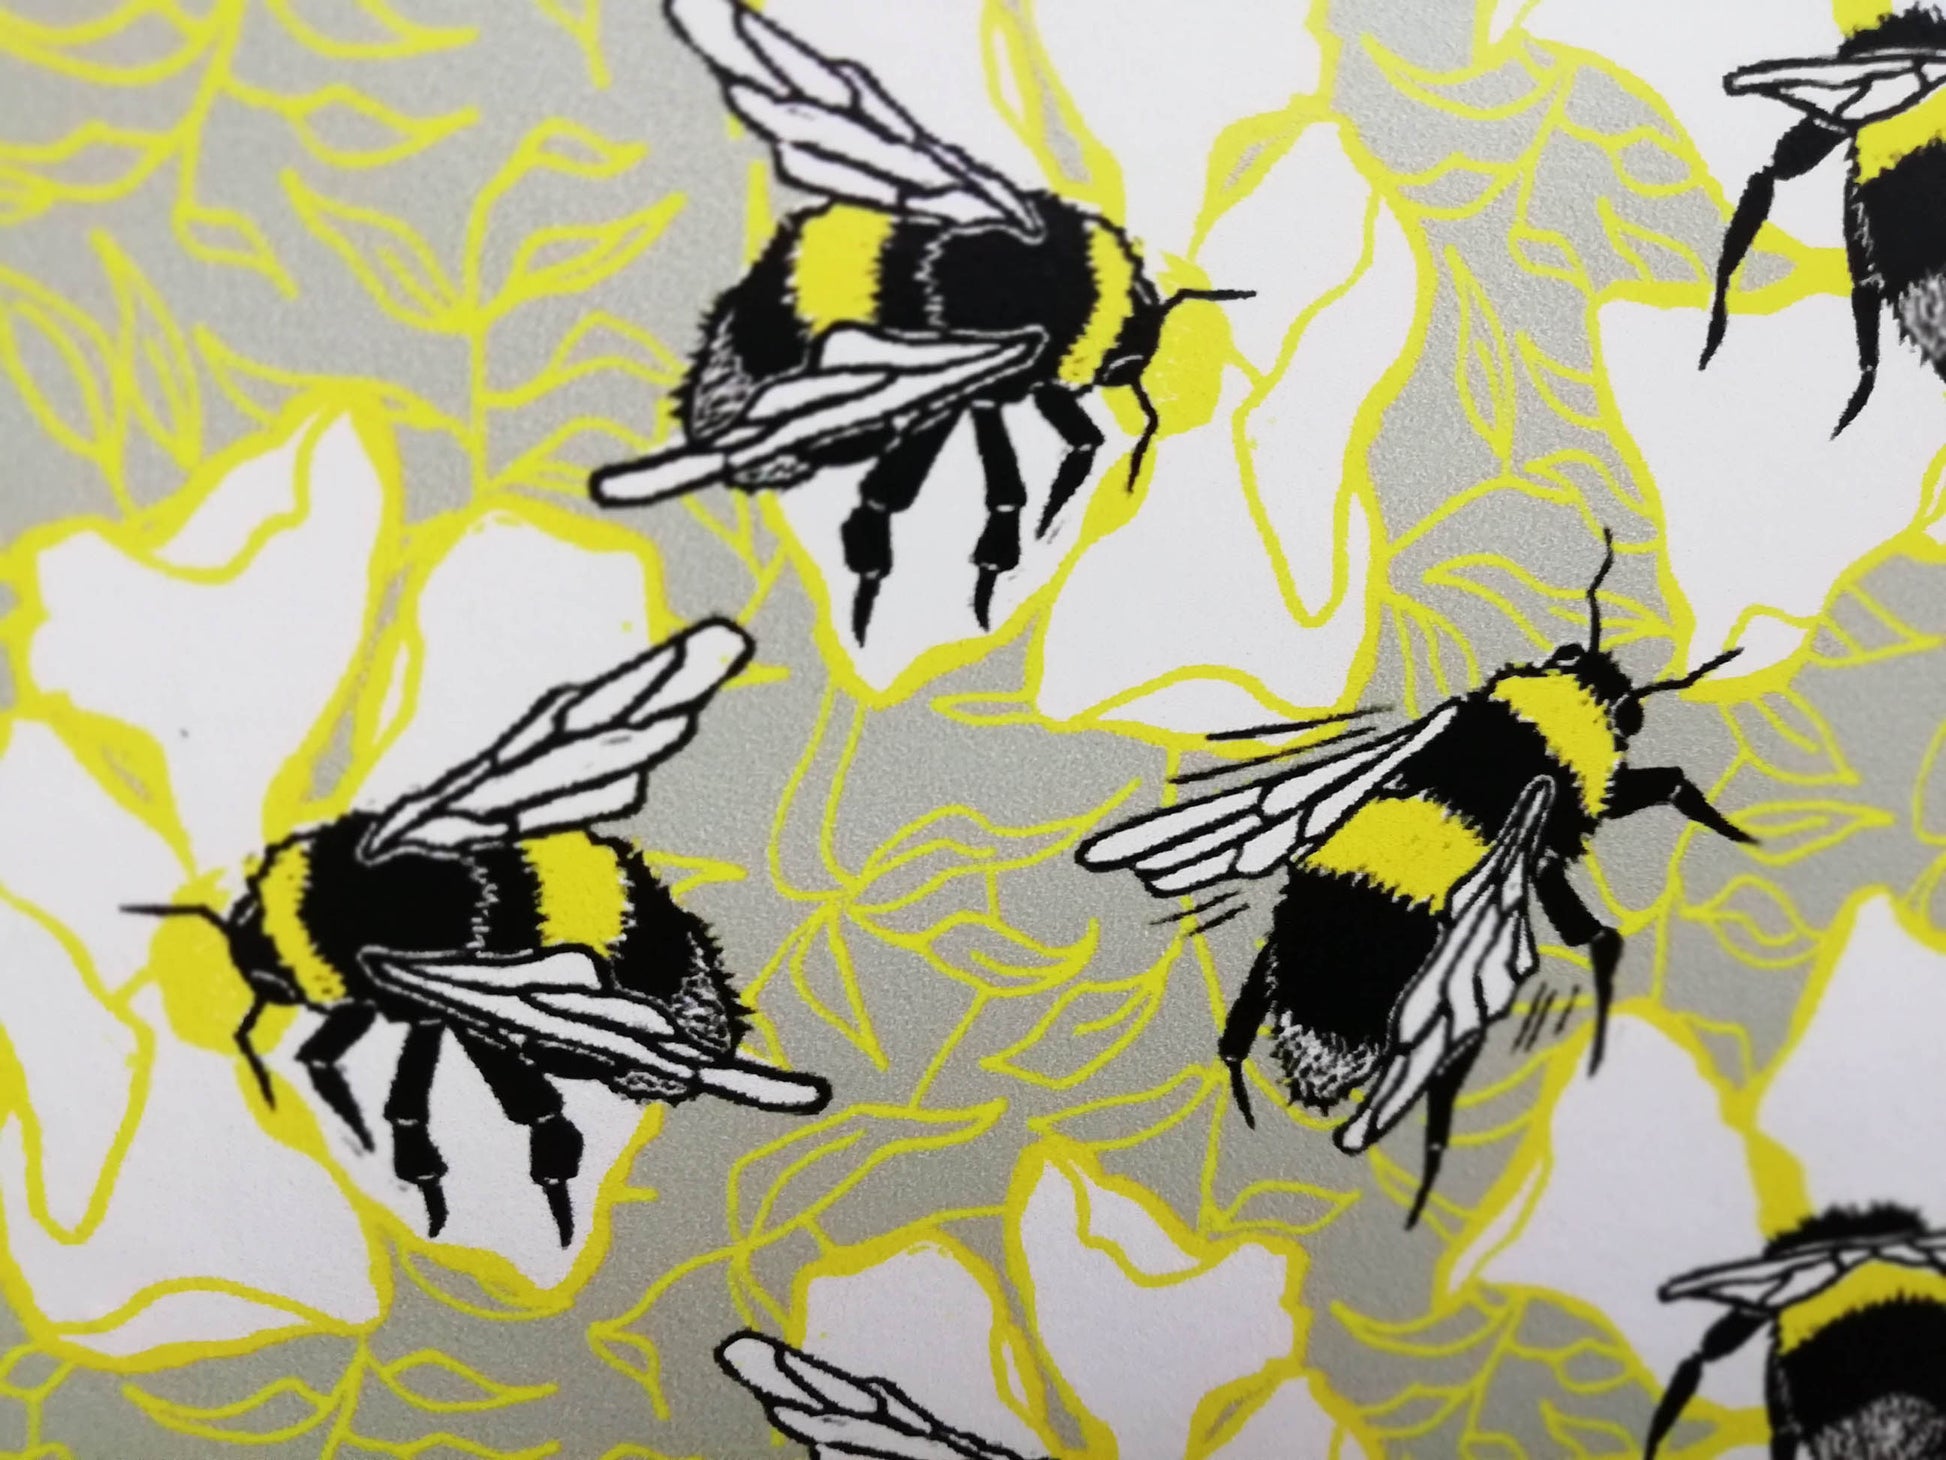 Bumble Bees with yellow details on grey